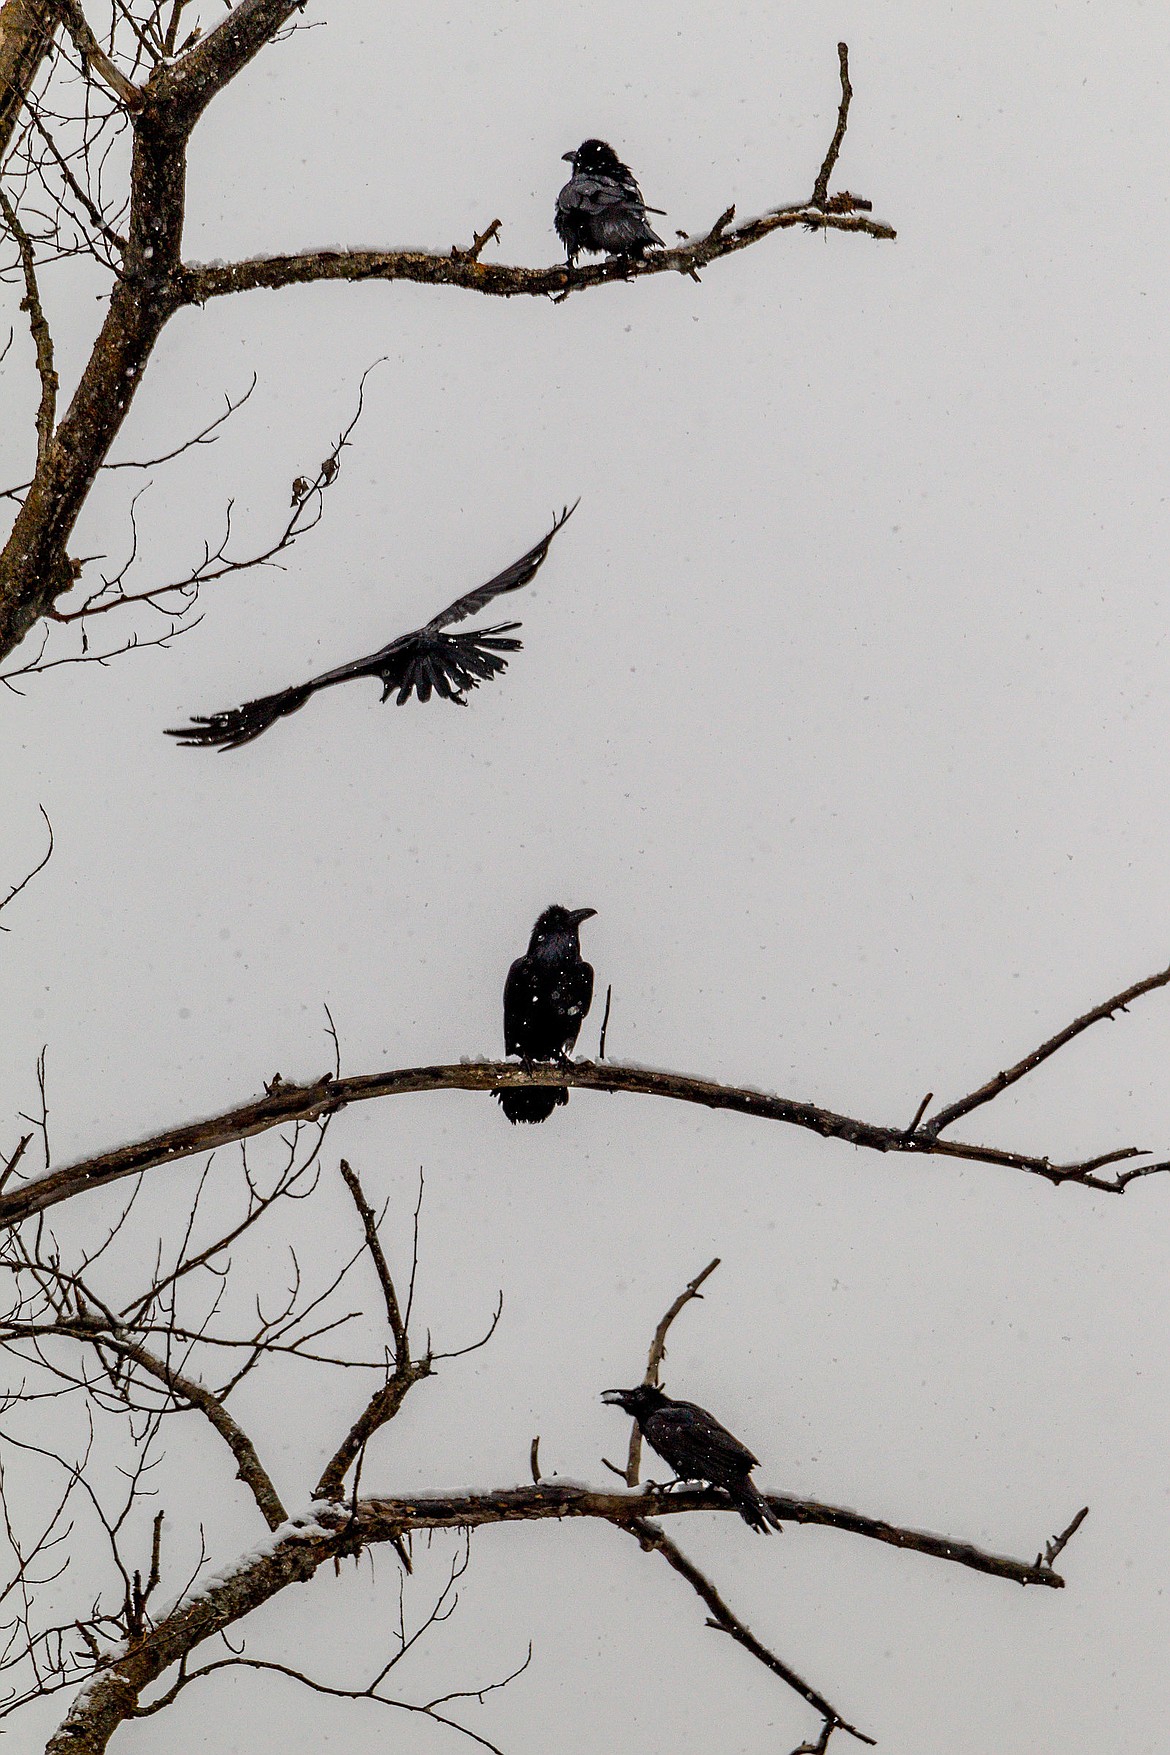 Ravens cluster about in the vicinity of a young bald eagle and a red-tailed hawk near Libby Creek at 5th Street Extension on Saturday, March 24, 2108. (John Blodgett/The Western News)